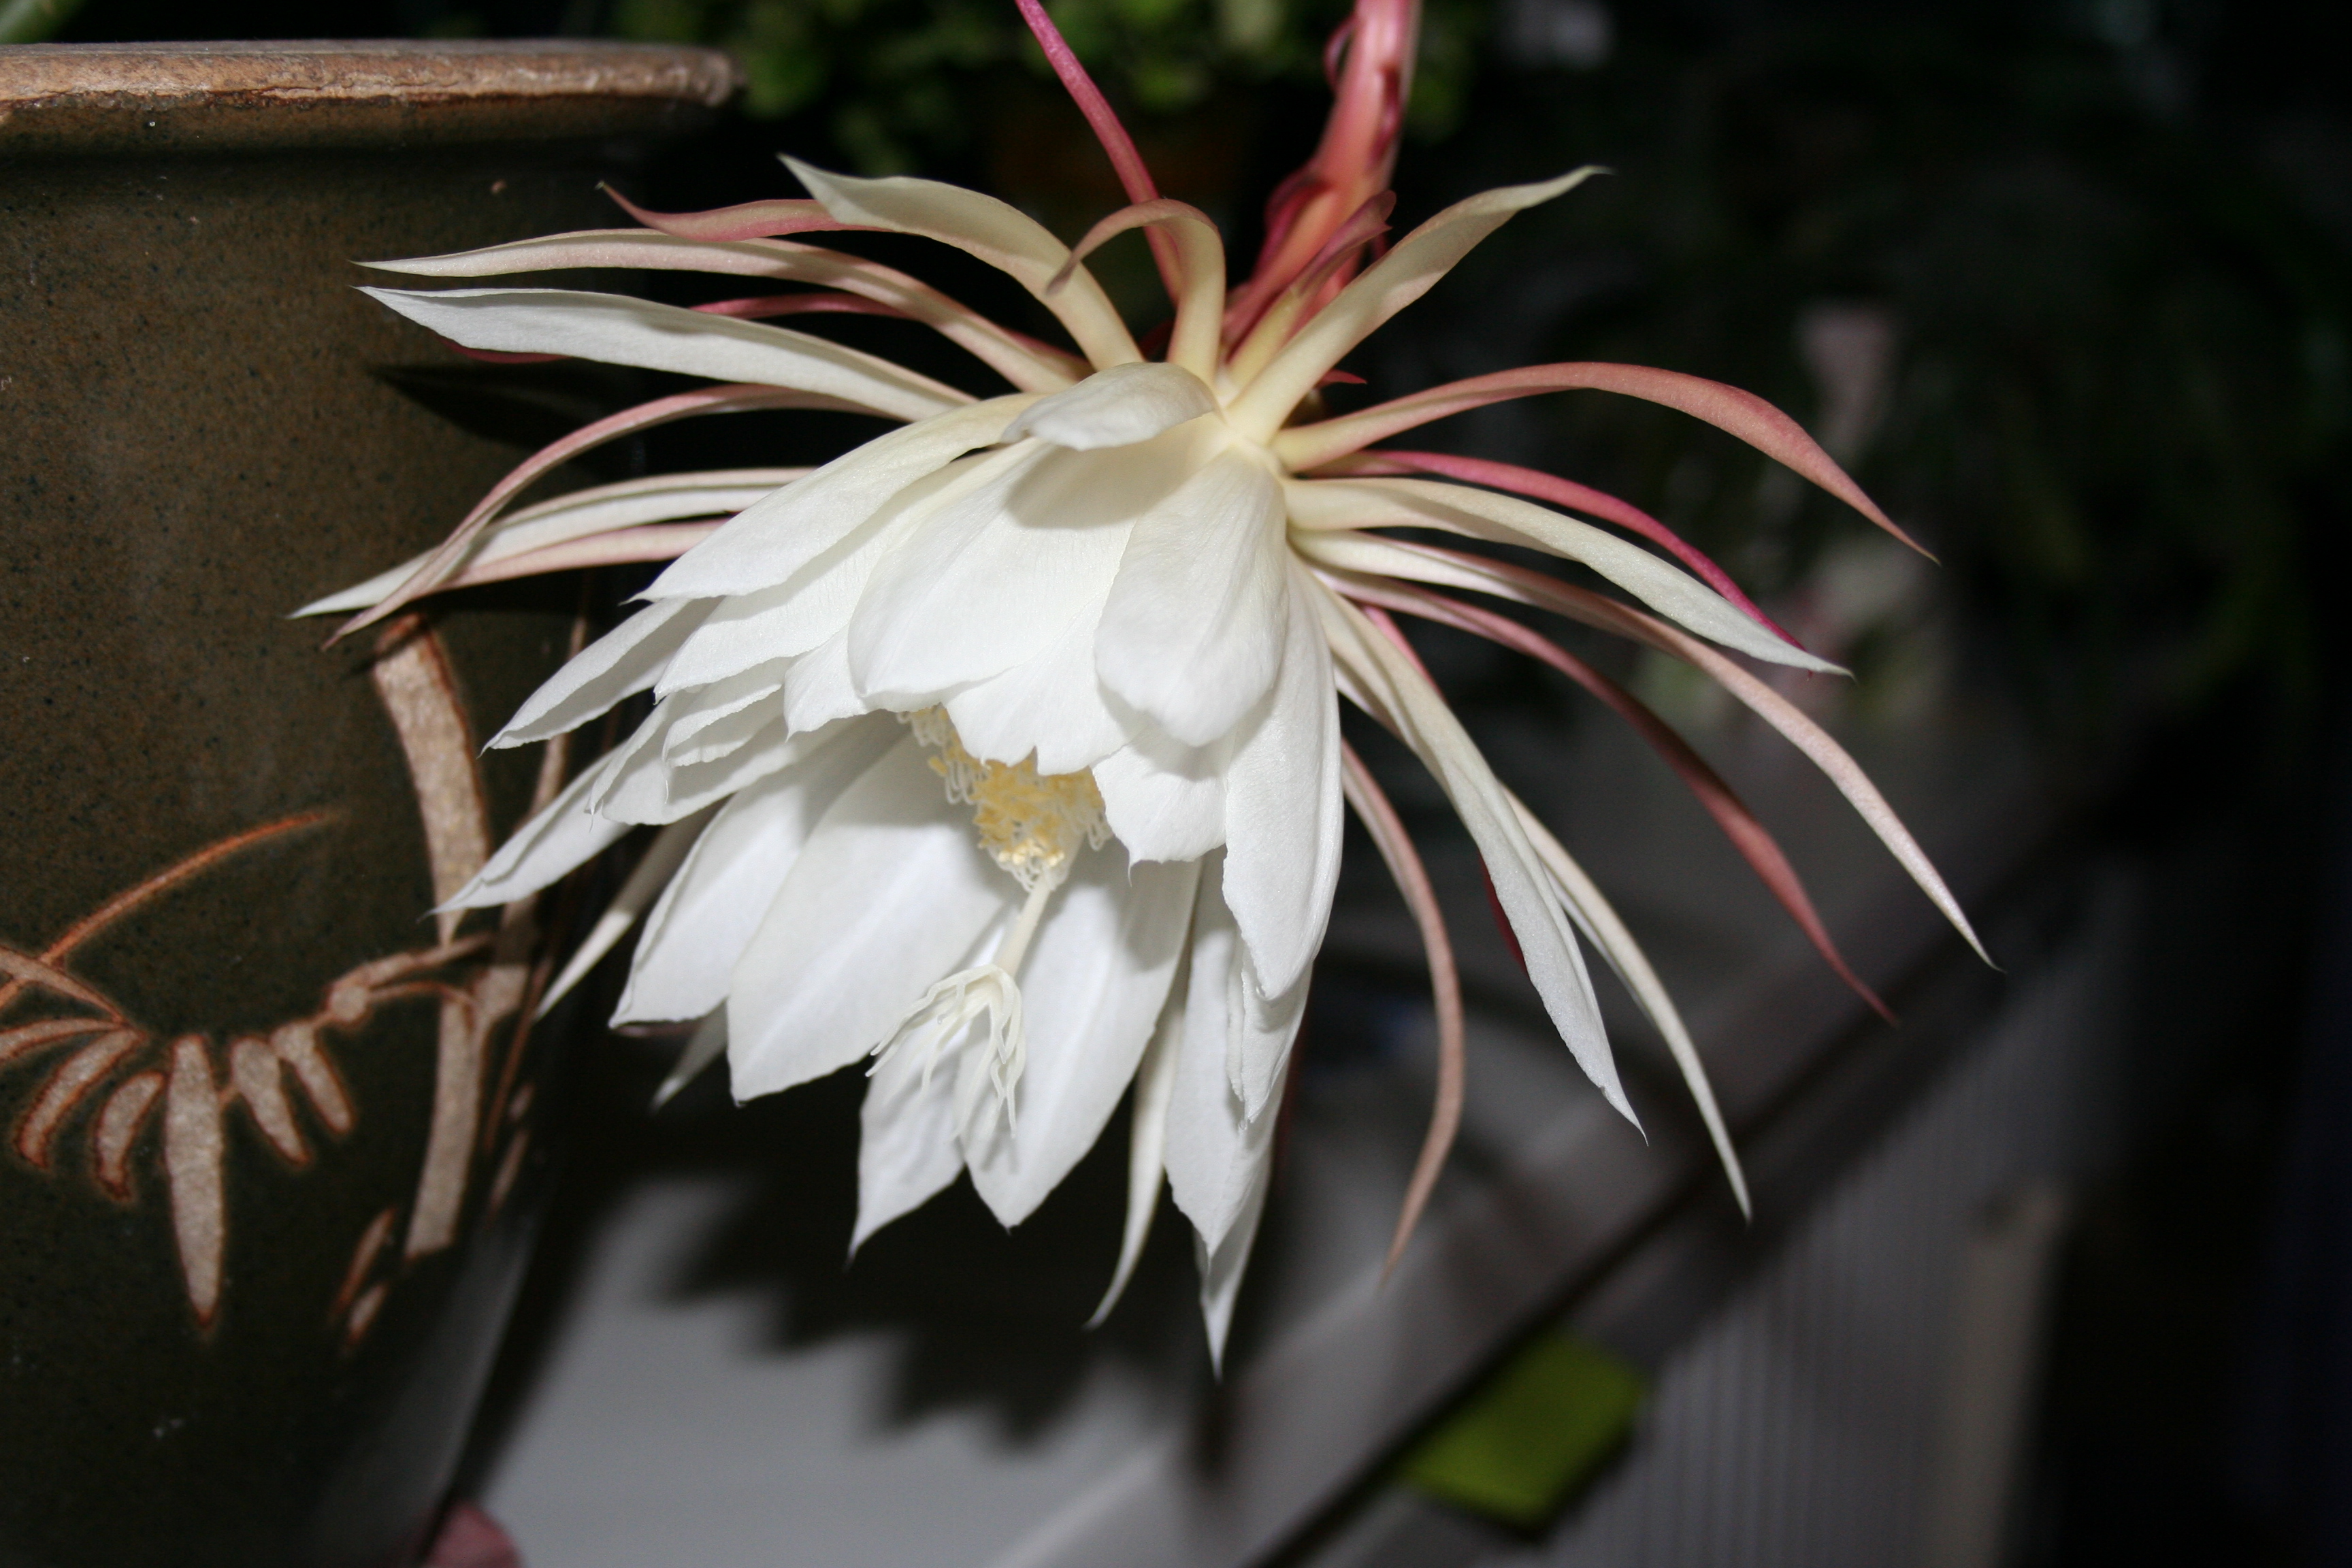 File:Epiphyllum oxypetalum(Queen of the night).jpg - Wikimedia Commons